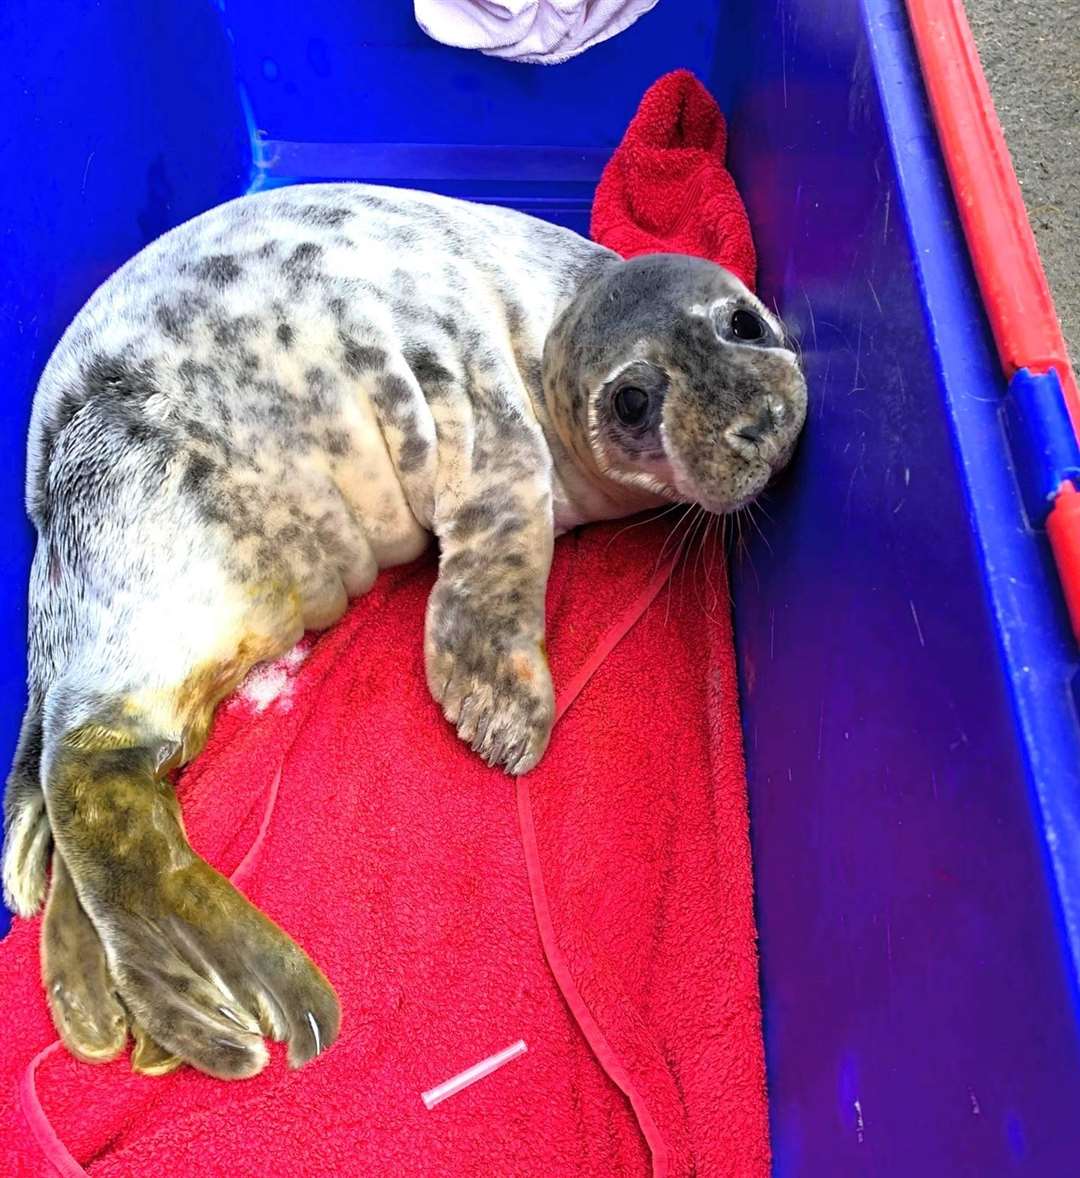 Jan the seal pup is the first of the charity's animals to be sponsored.